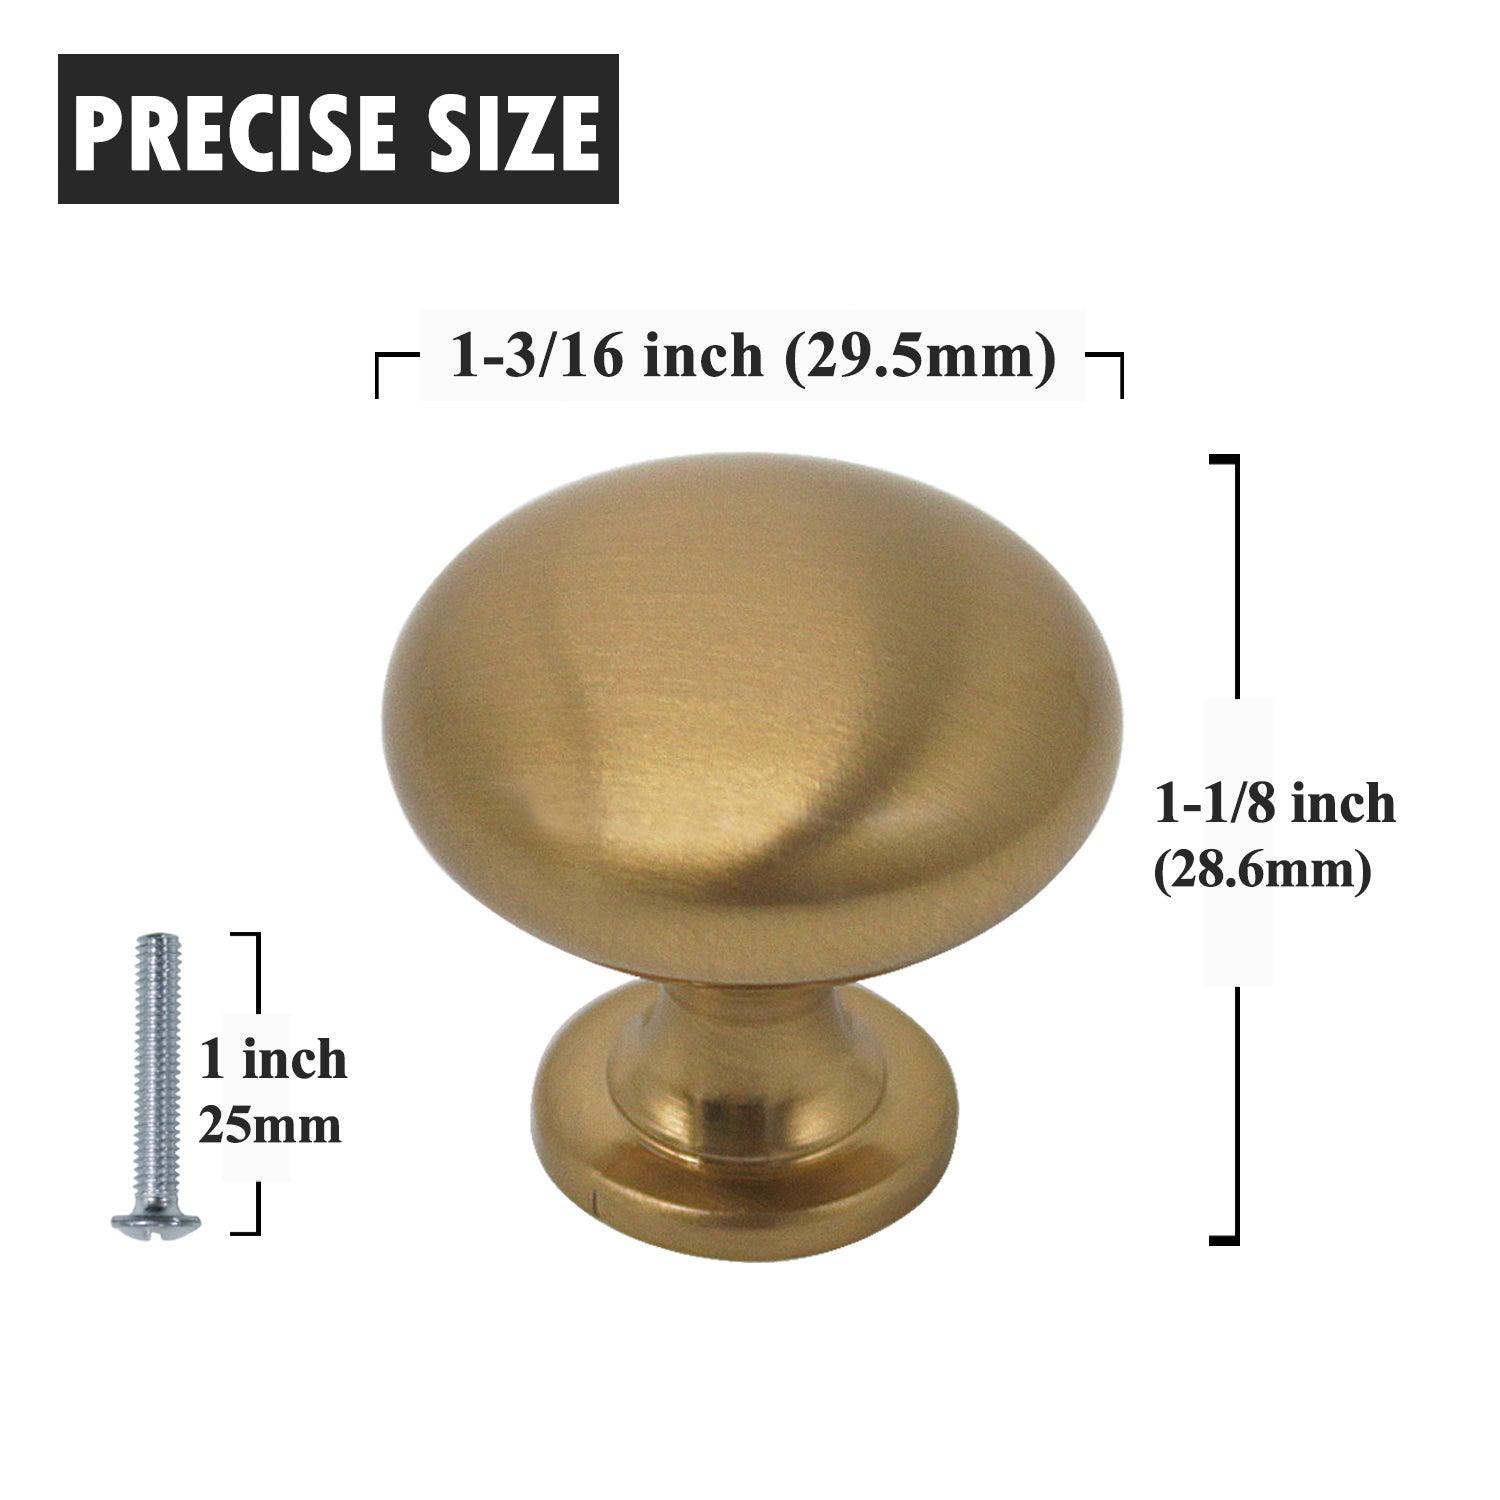 Solid Round Cabinet Knobs 1 1/5" - Champagne Brass/Black/Brushed Nickel/Polished Chrome Finish PS3910